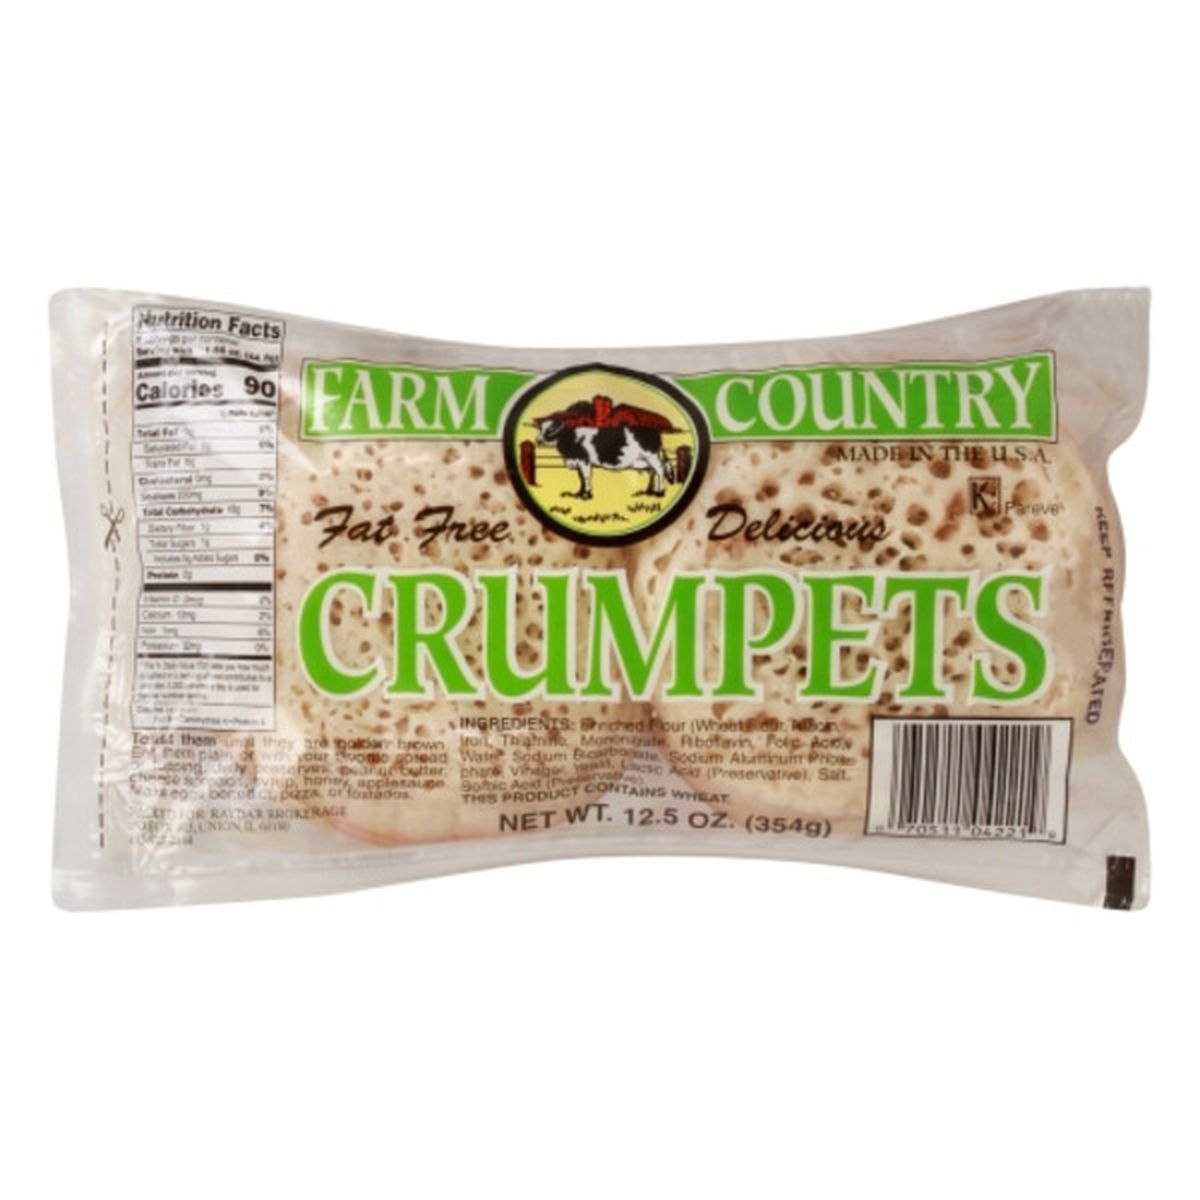 Calories in Farm Country Bread, Crumpets, Fat Free